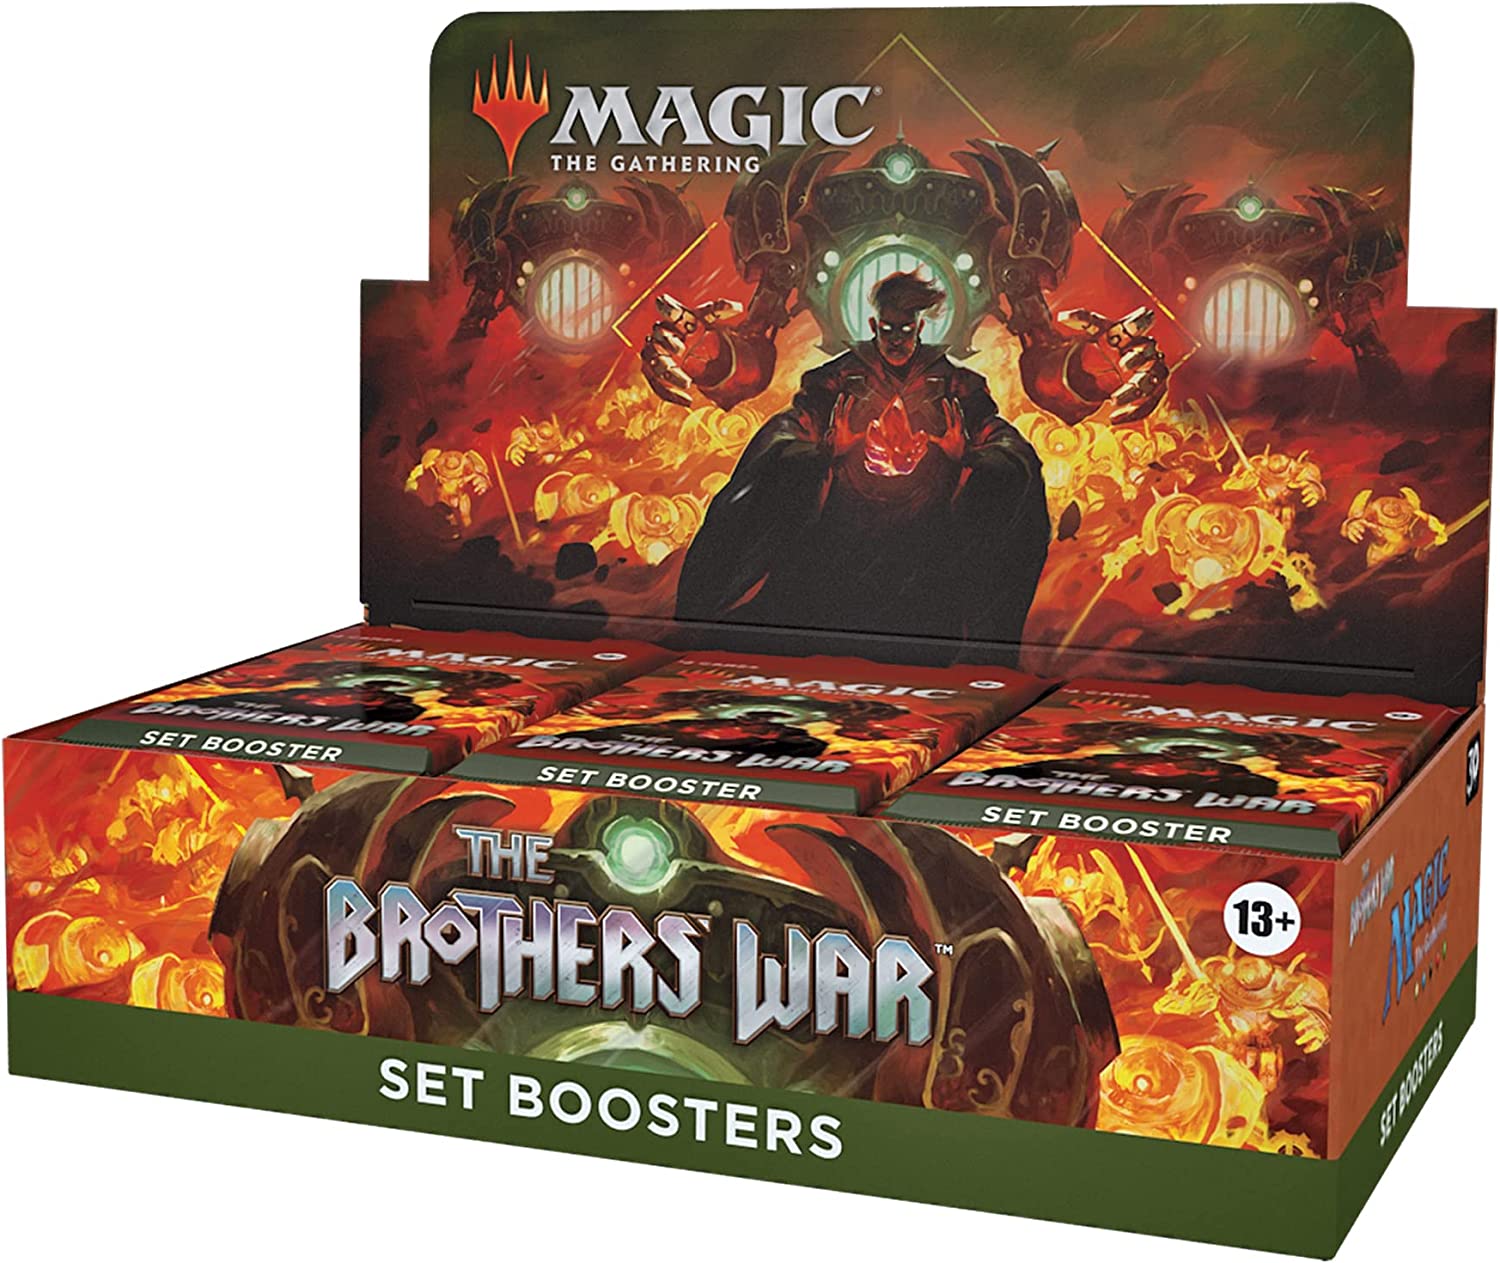 Magic The Gathering: The Brothers' War Sealed Set Booster Box (Pre-Order) - Miraj Trading